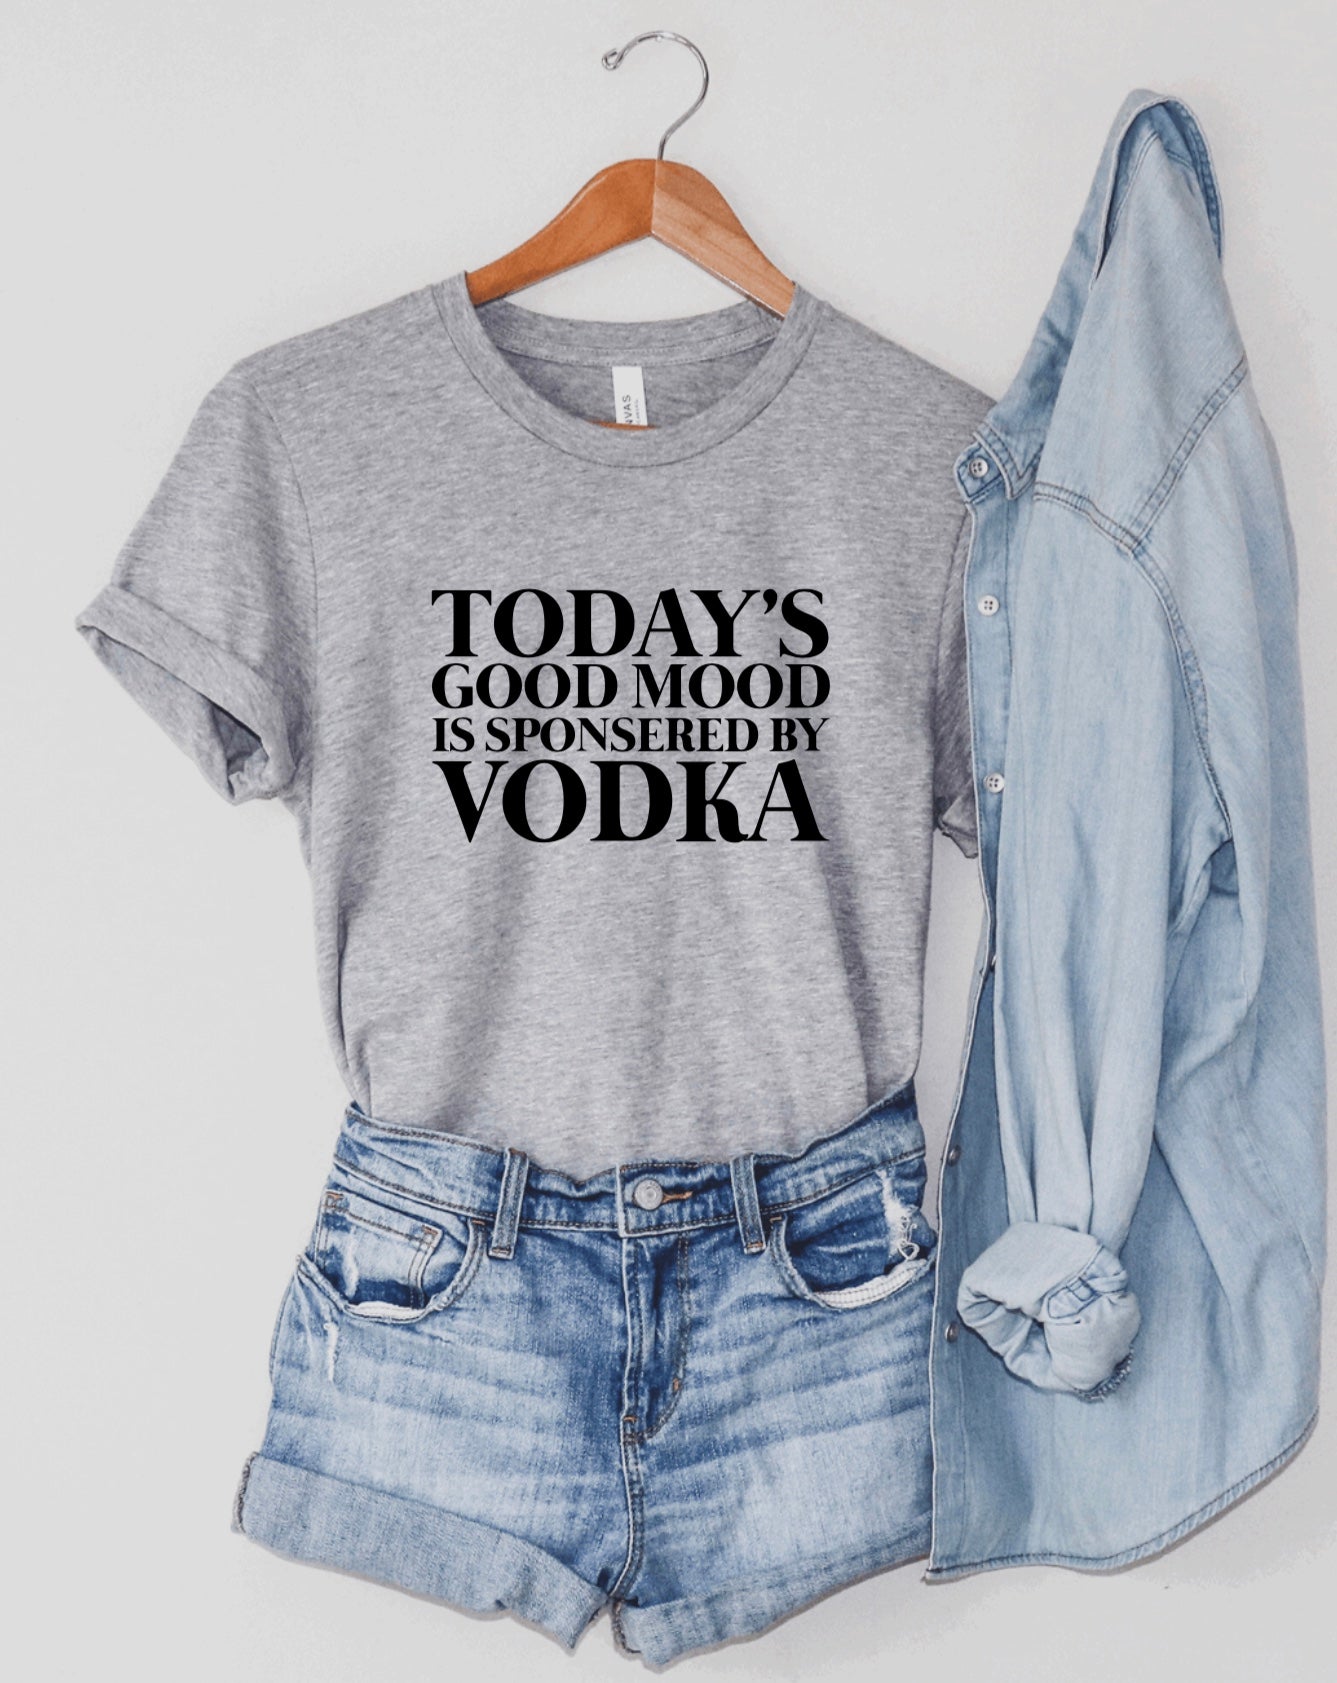 Today’s good mood is sponsored by vodka t-shirt 